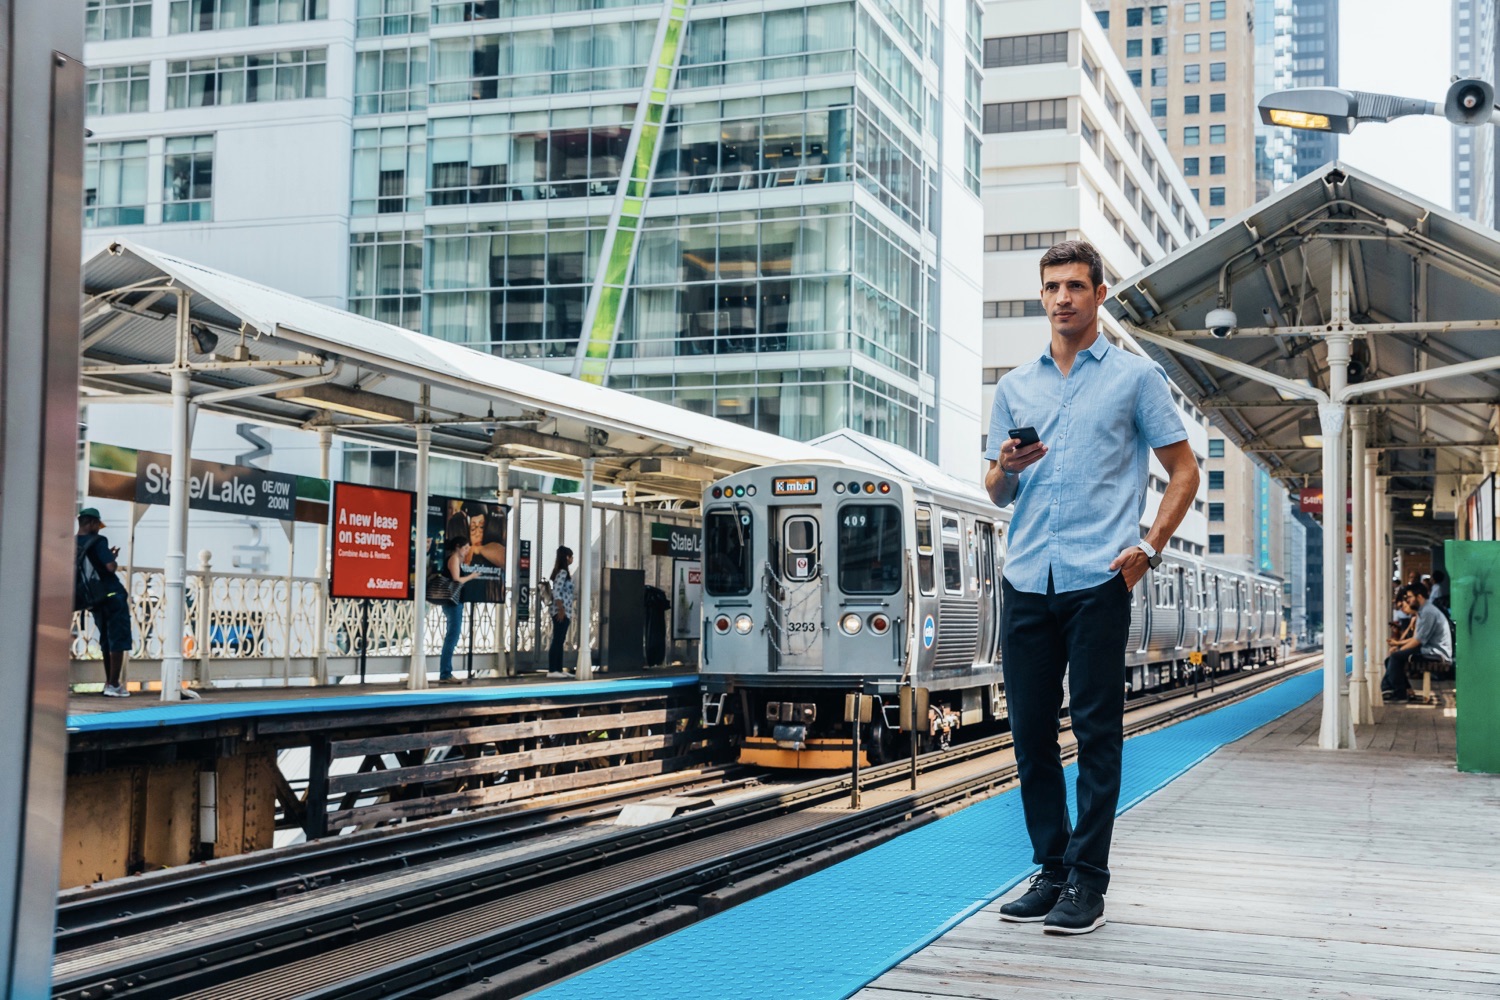 17_CHICAGO_LIFESTYLE_MAN_ELEVATED_TRAIN_STOP_1